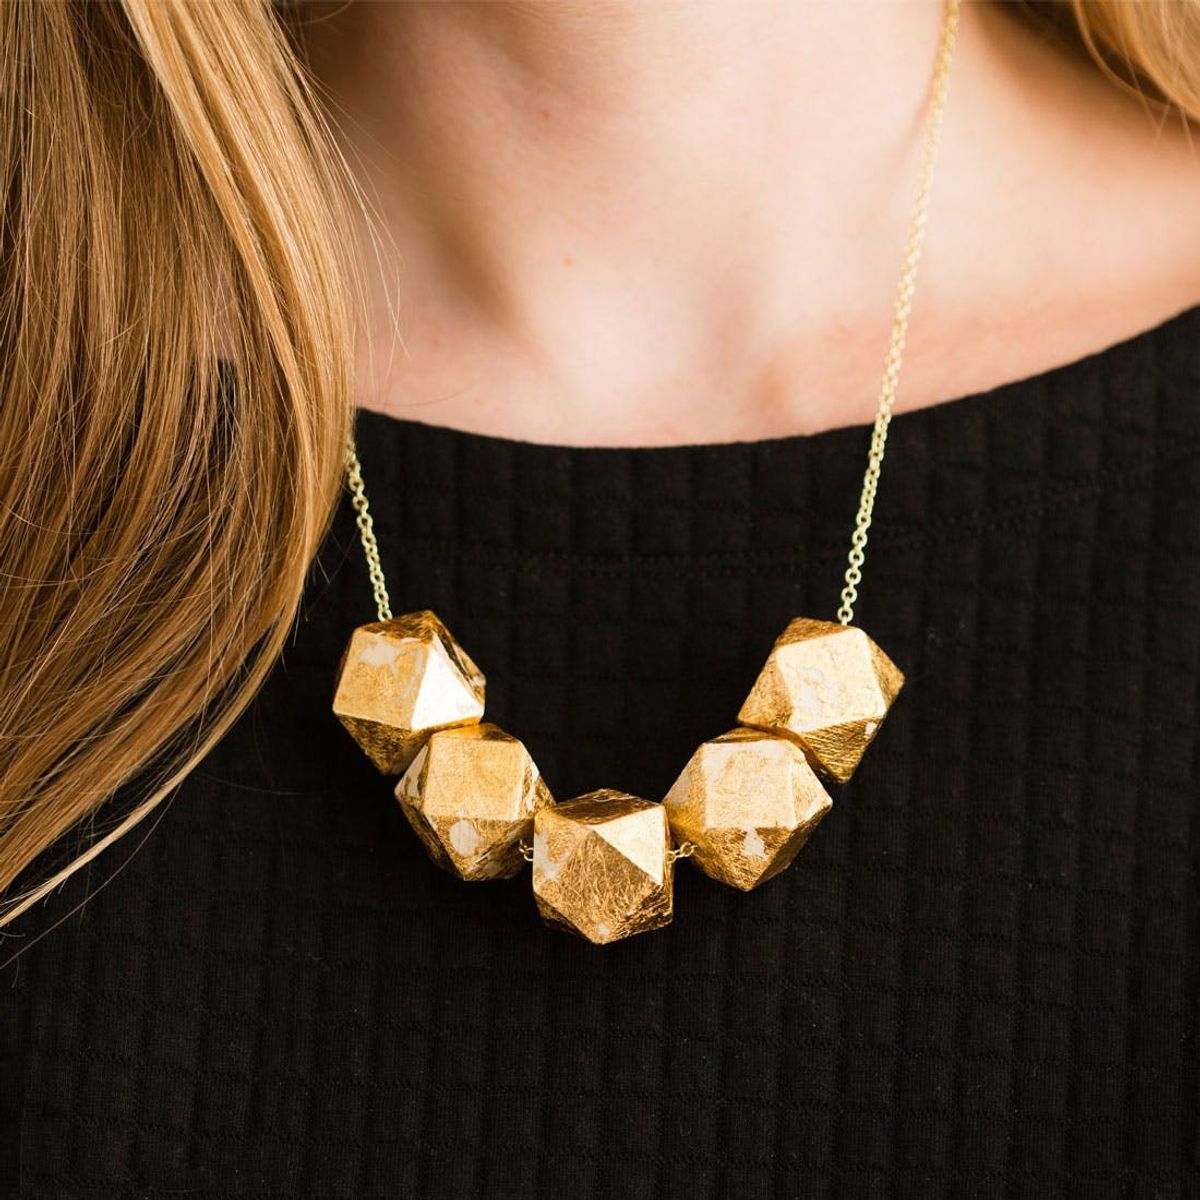 Transform Simple Wood Beads into a Gold Statement Necklace